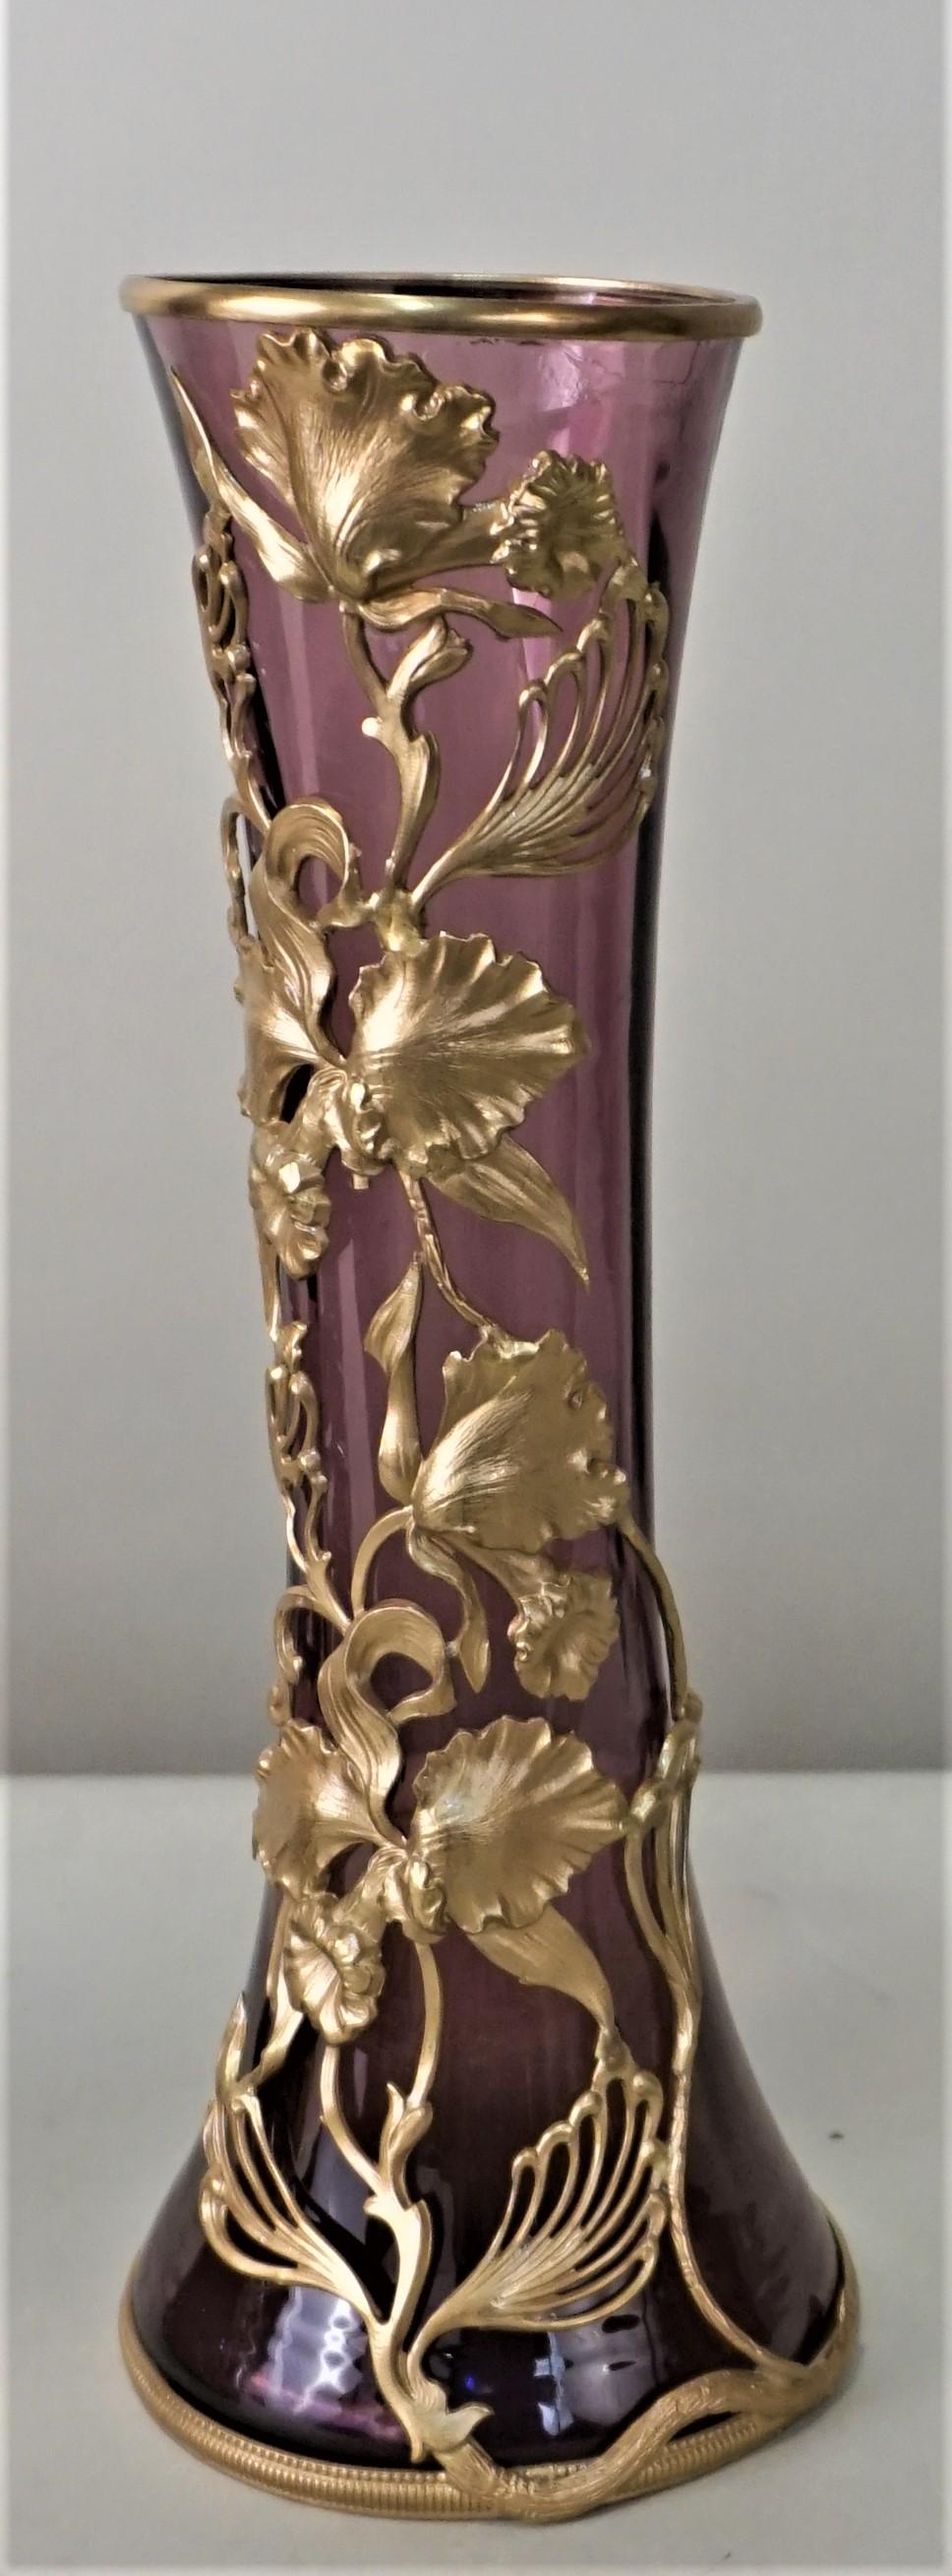 Pair of purple color glass vases with bronze overlay.